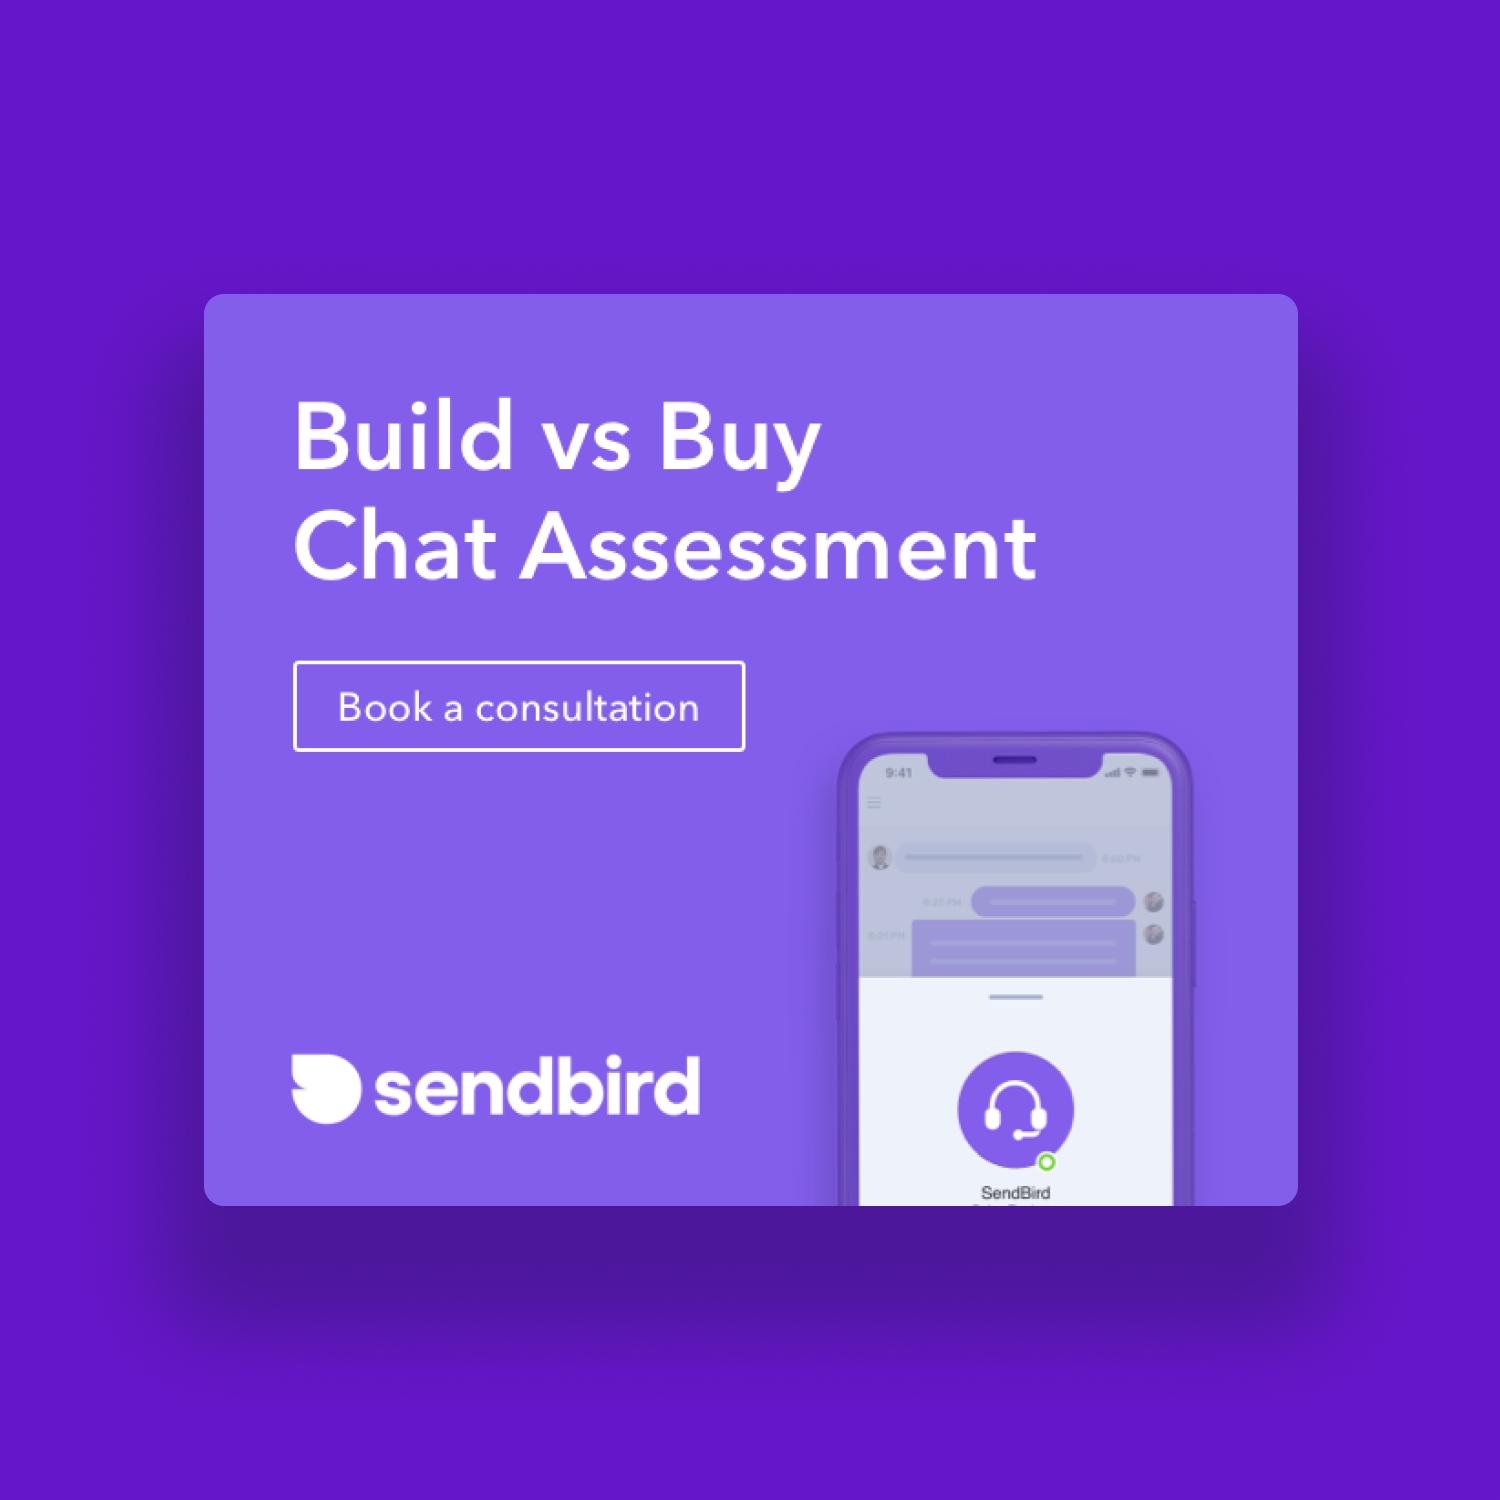 Build vs. Buy Chat Assessment paid ad mockup